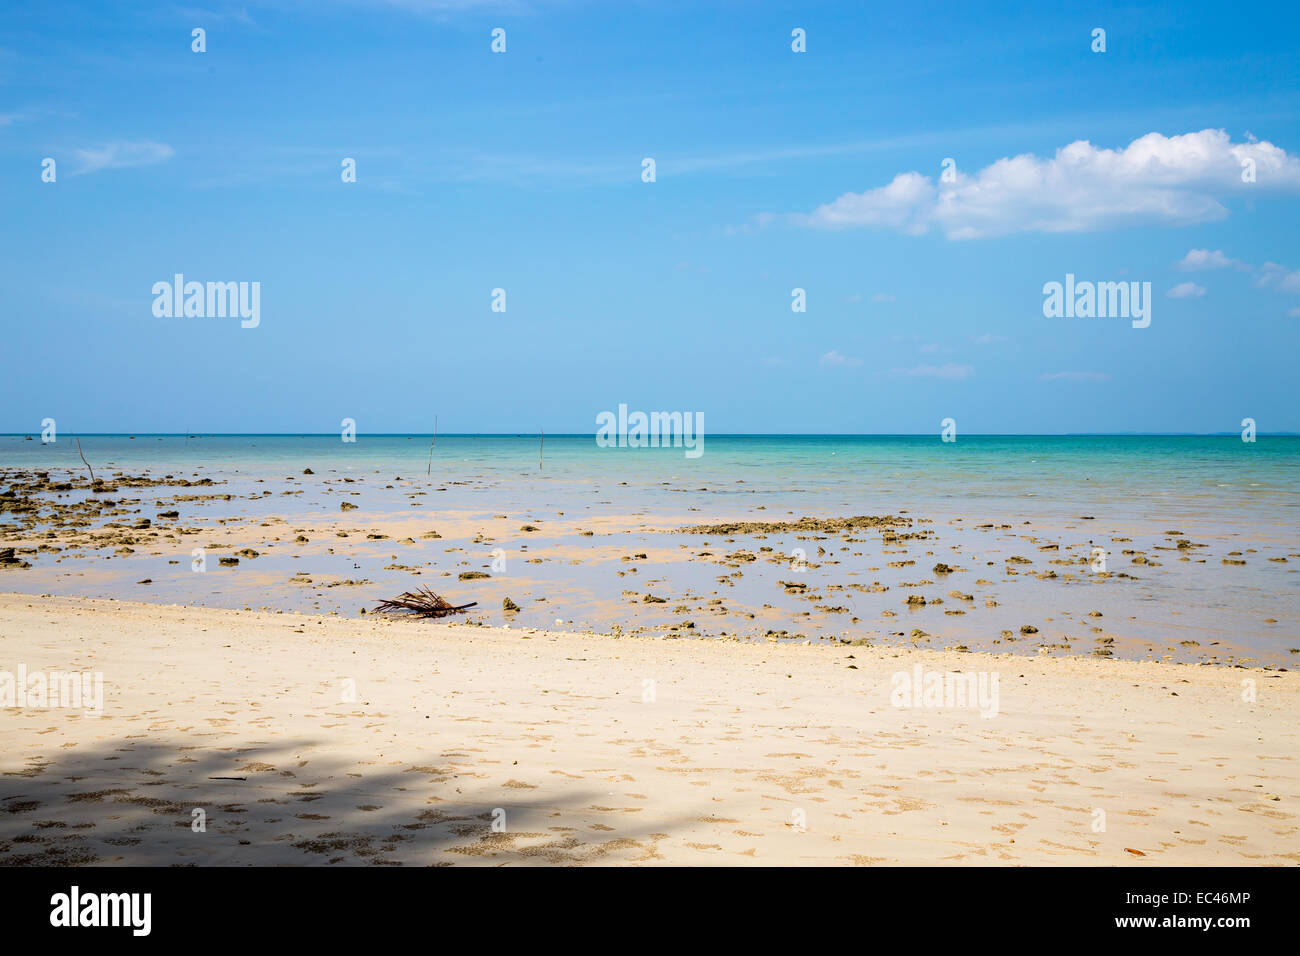 Low tide on a sandy beach with blue sky. Stock Photo